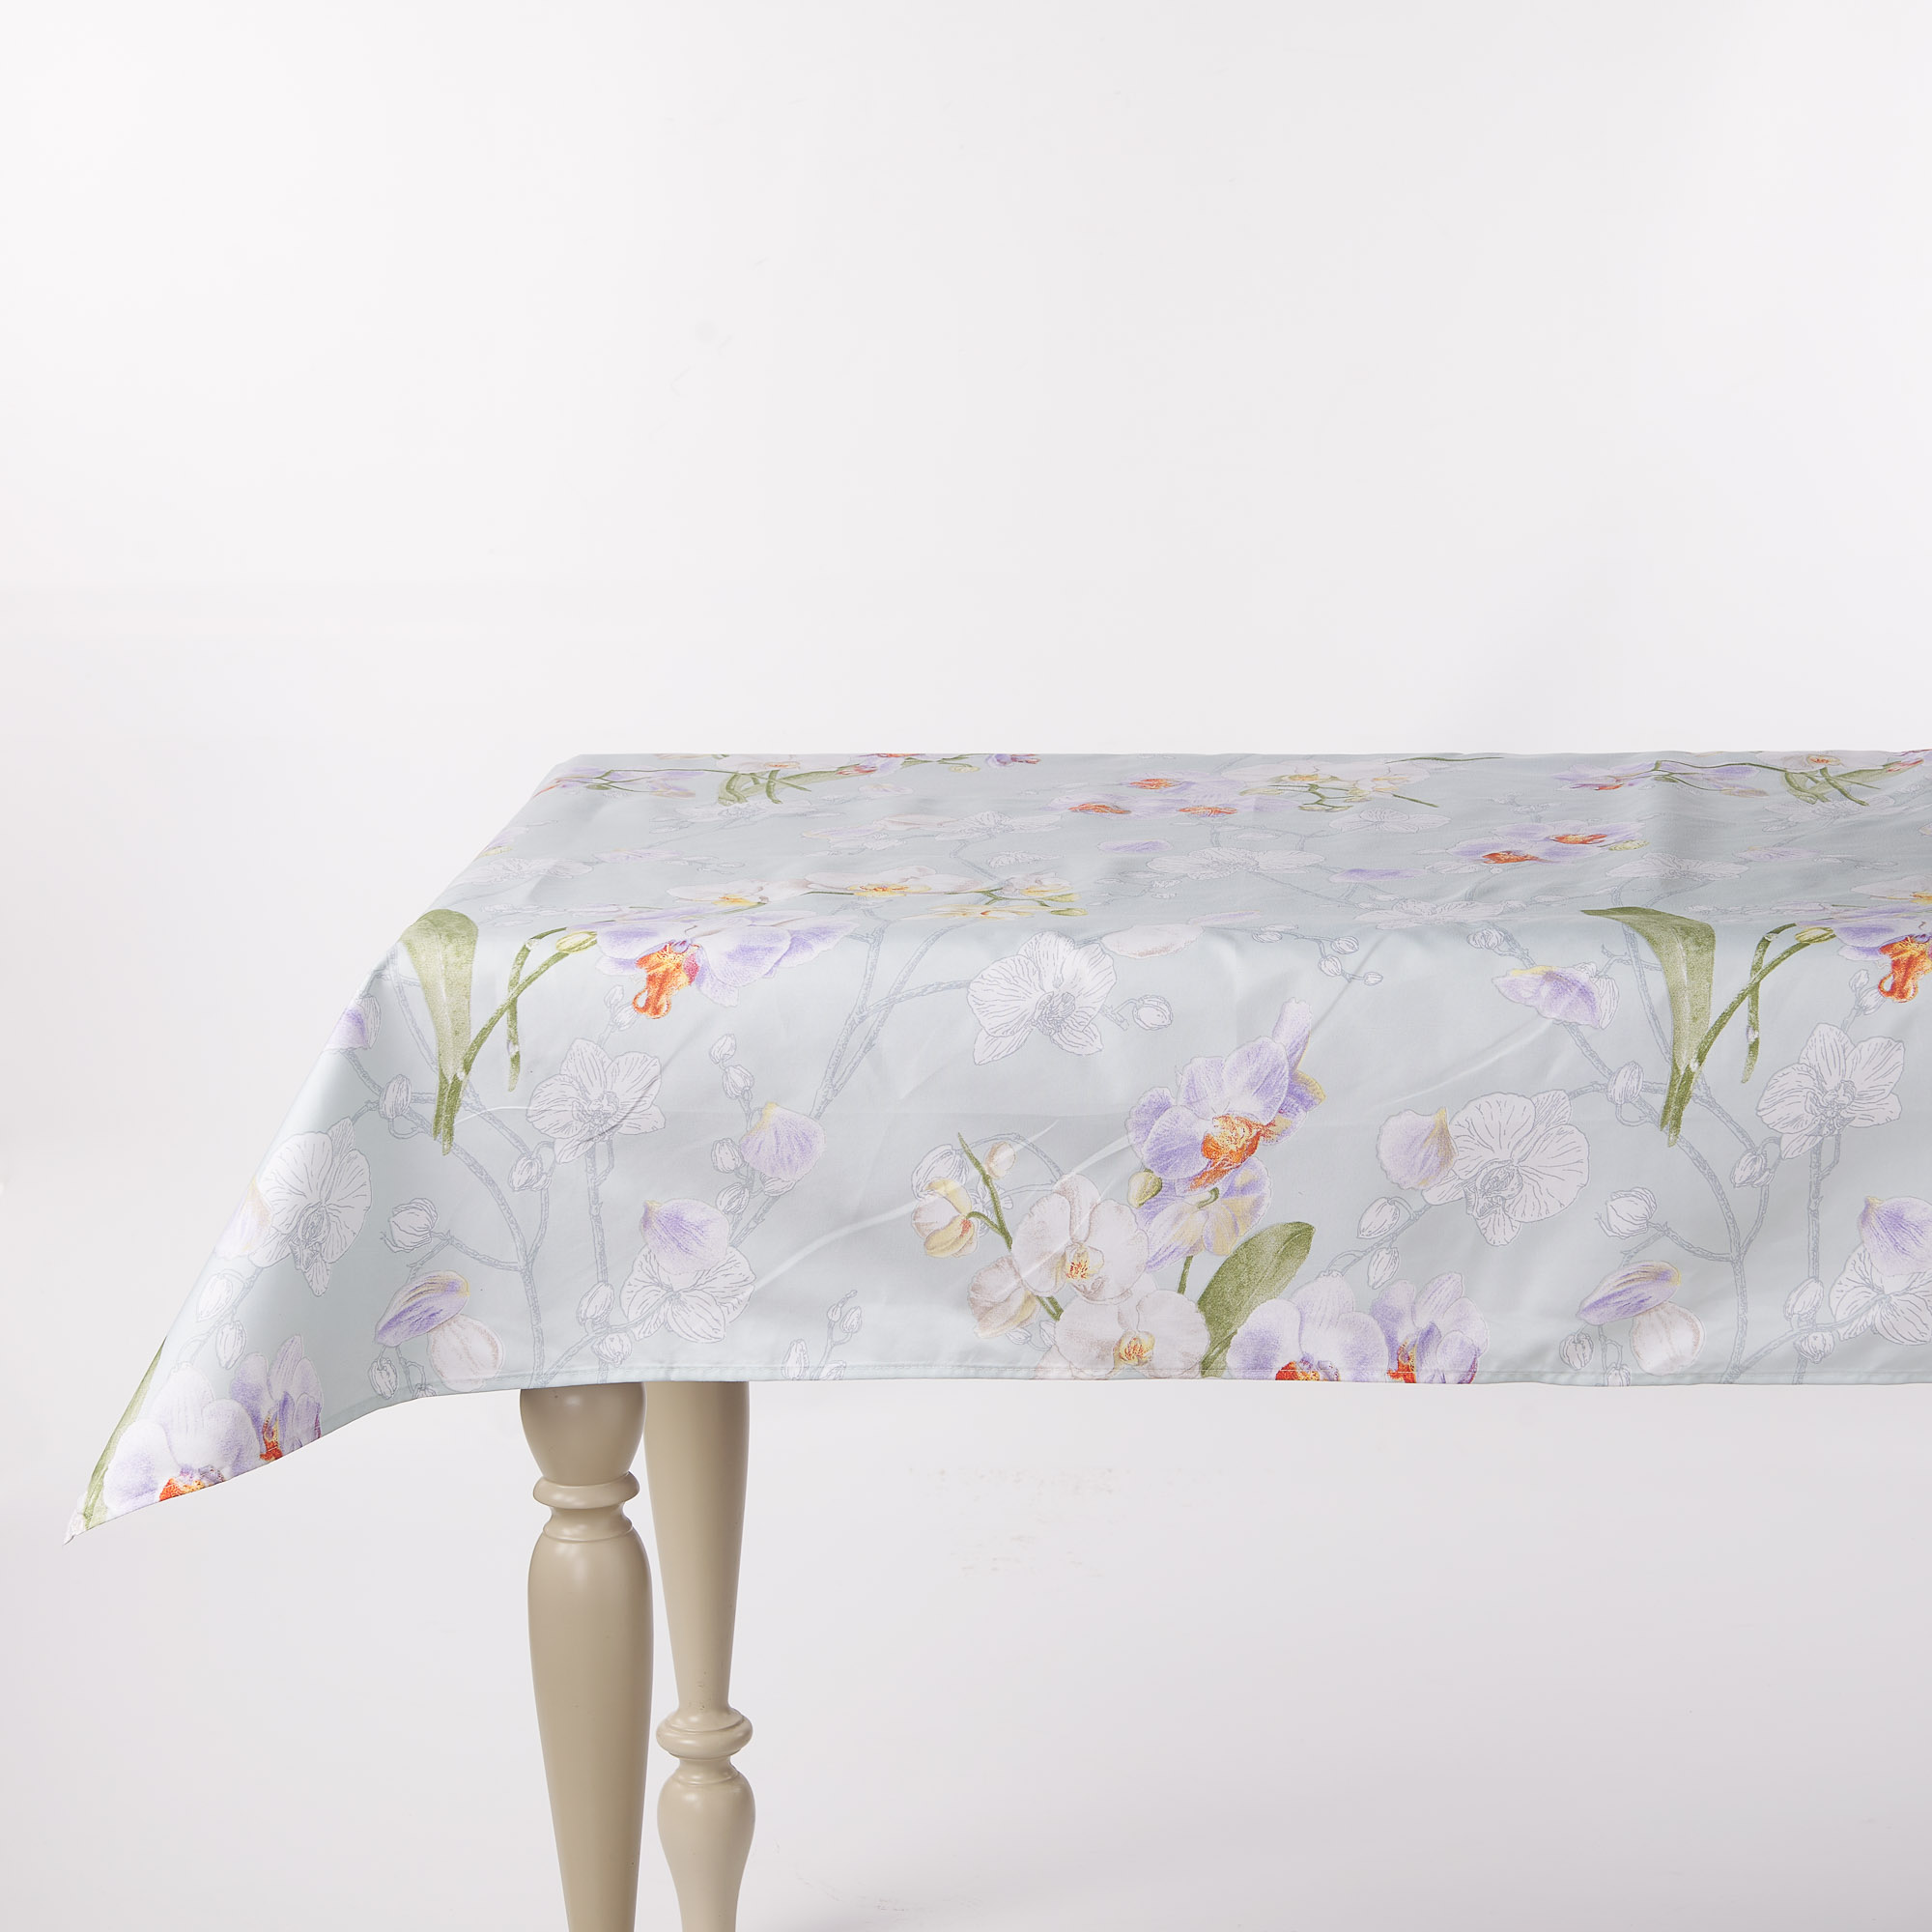 Acantha Microresin Stainproof Tablecloth multicolor Maè